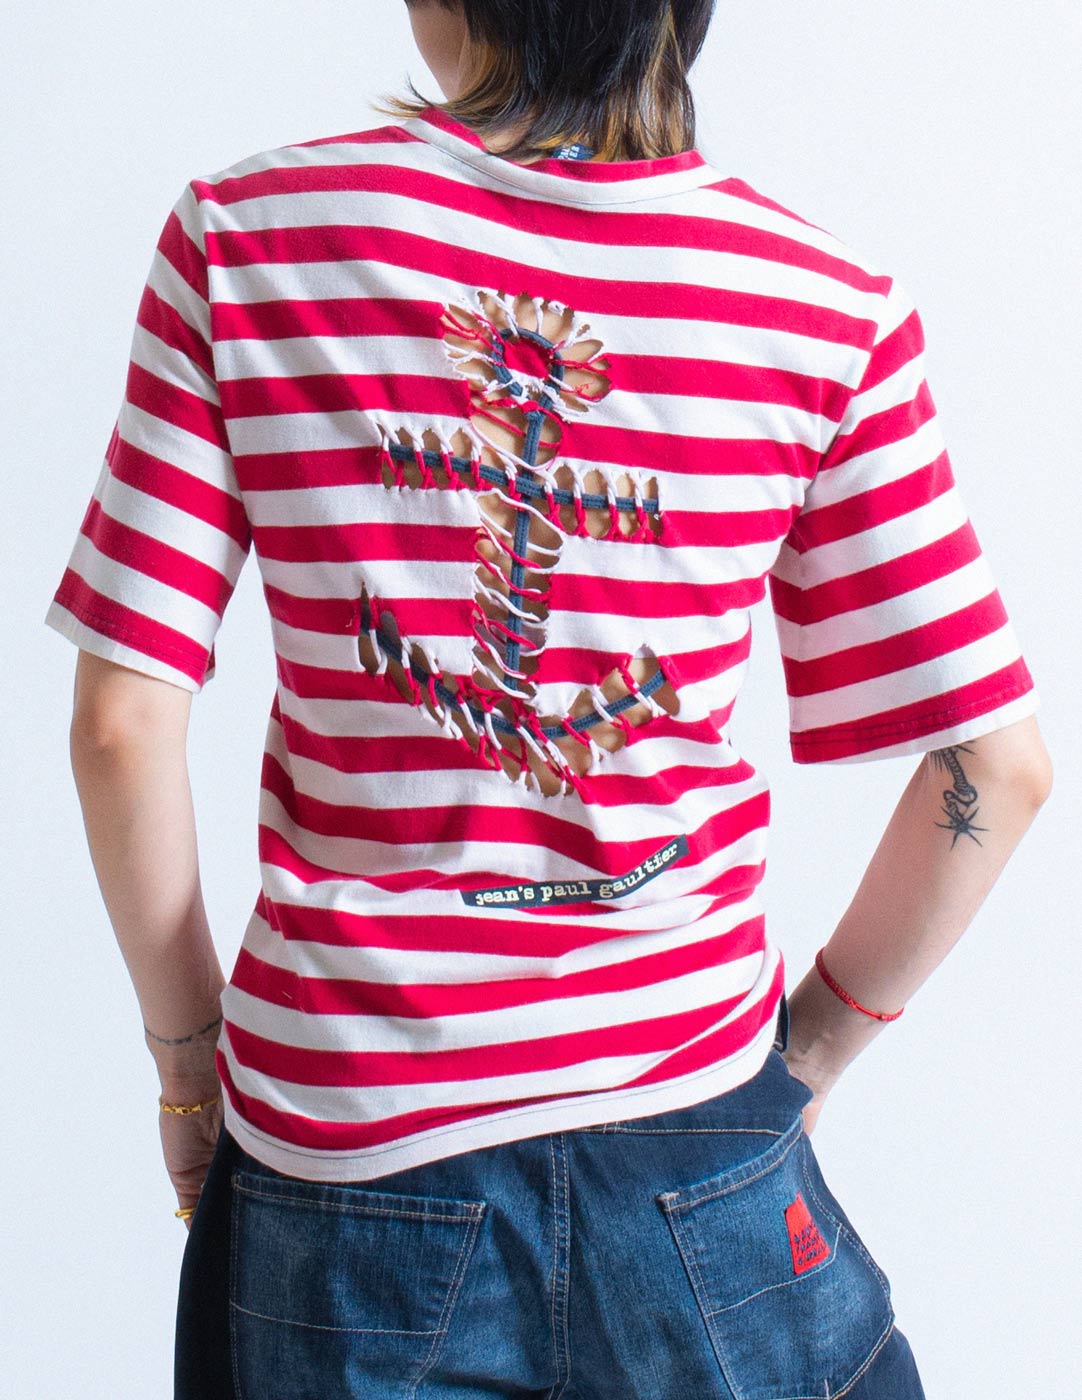 Jean Paul Gaultier vintage striped anchor tee back detail